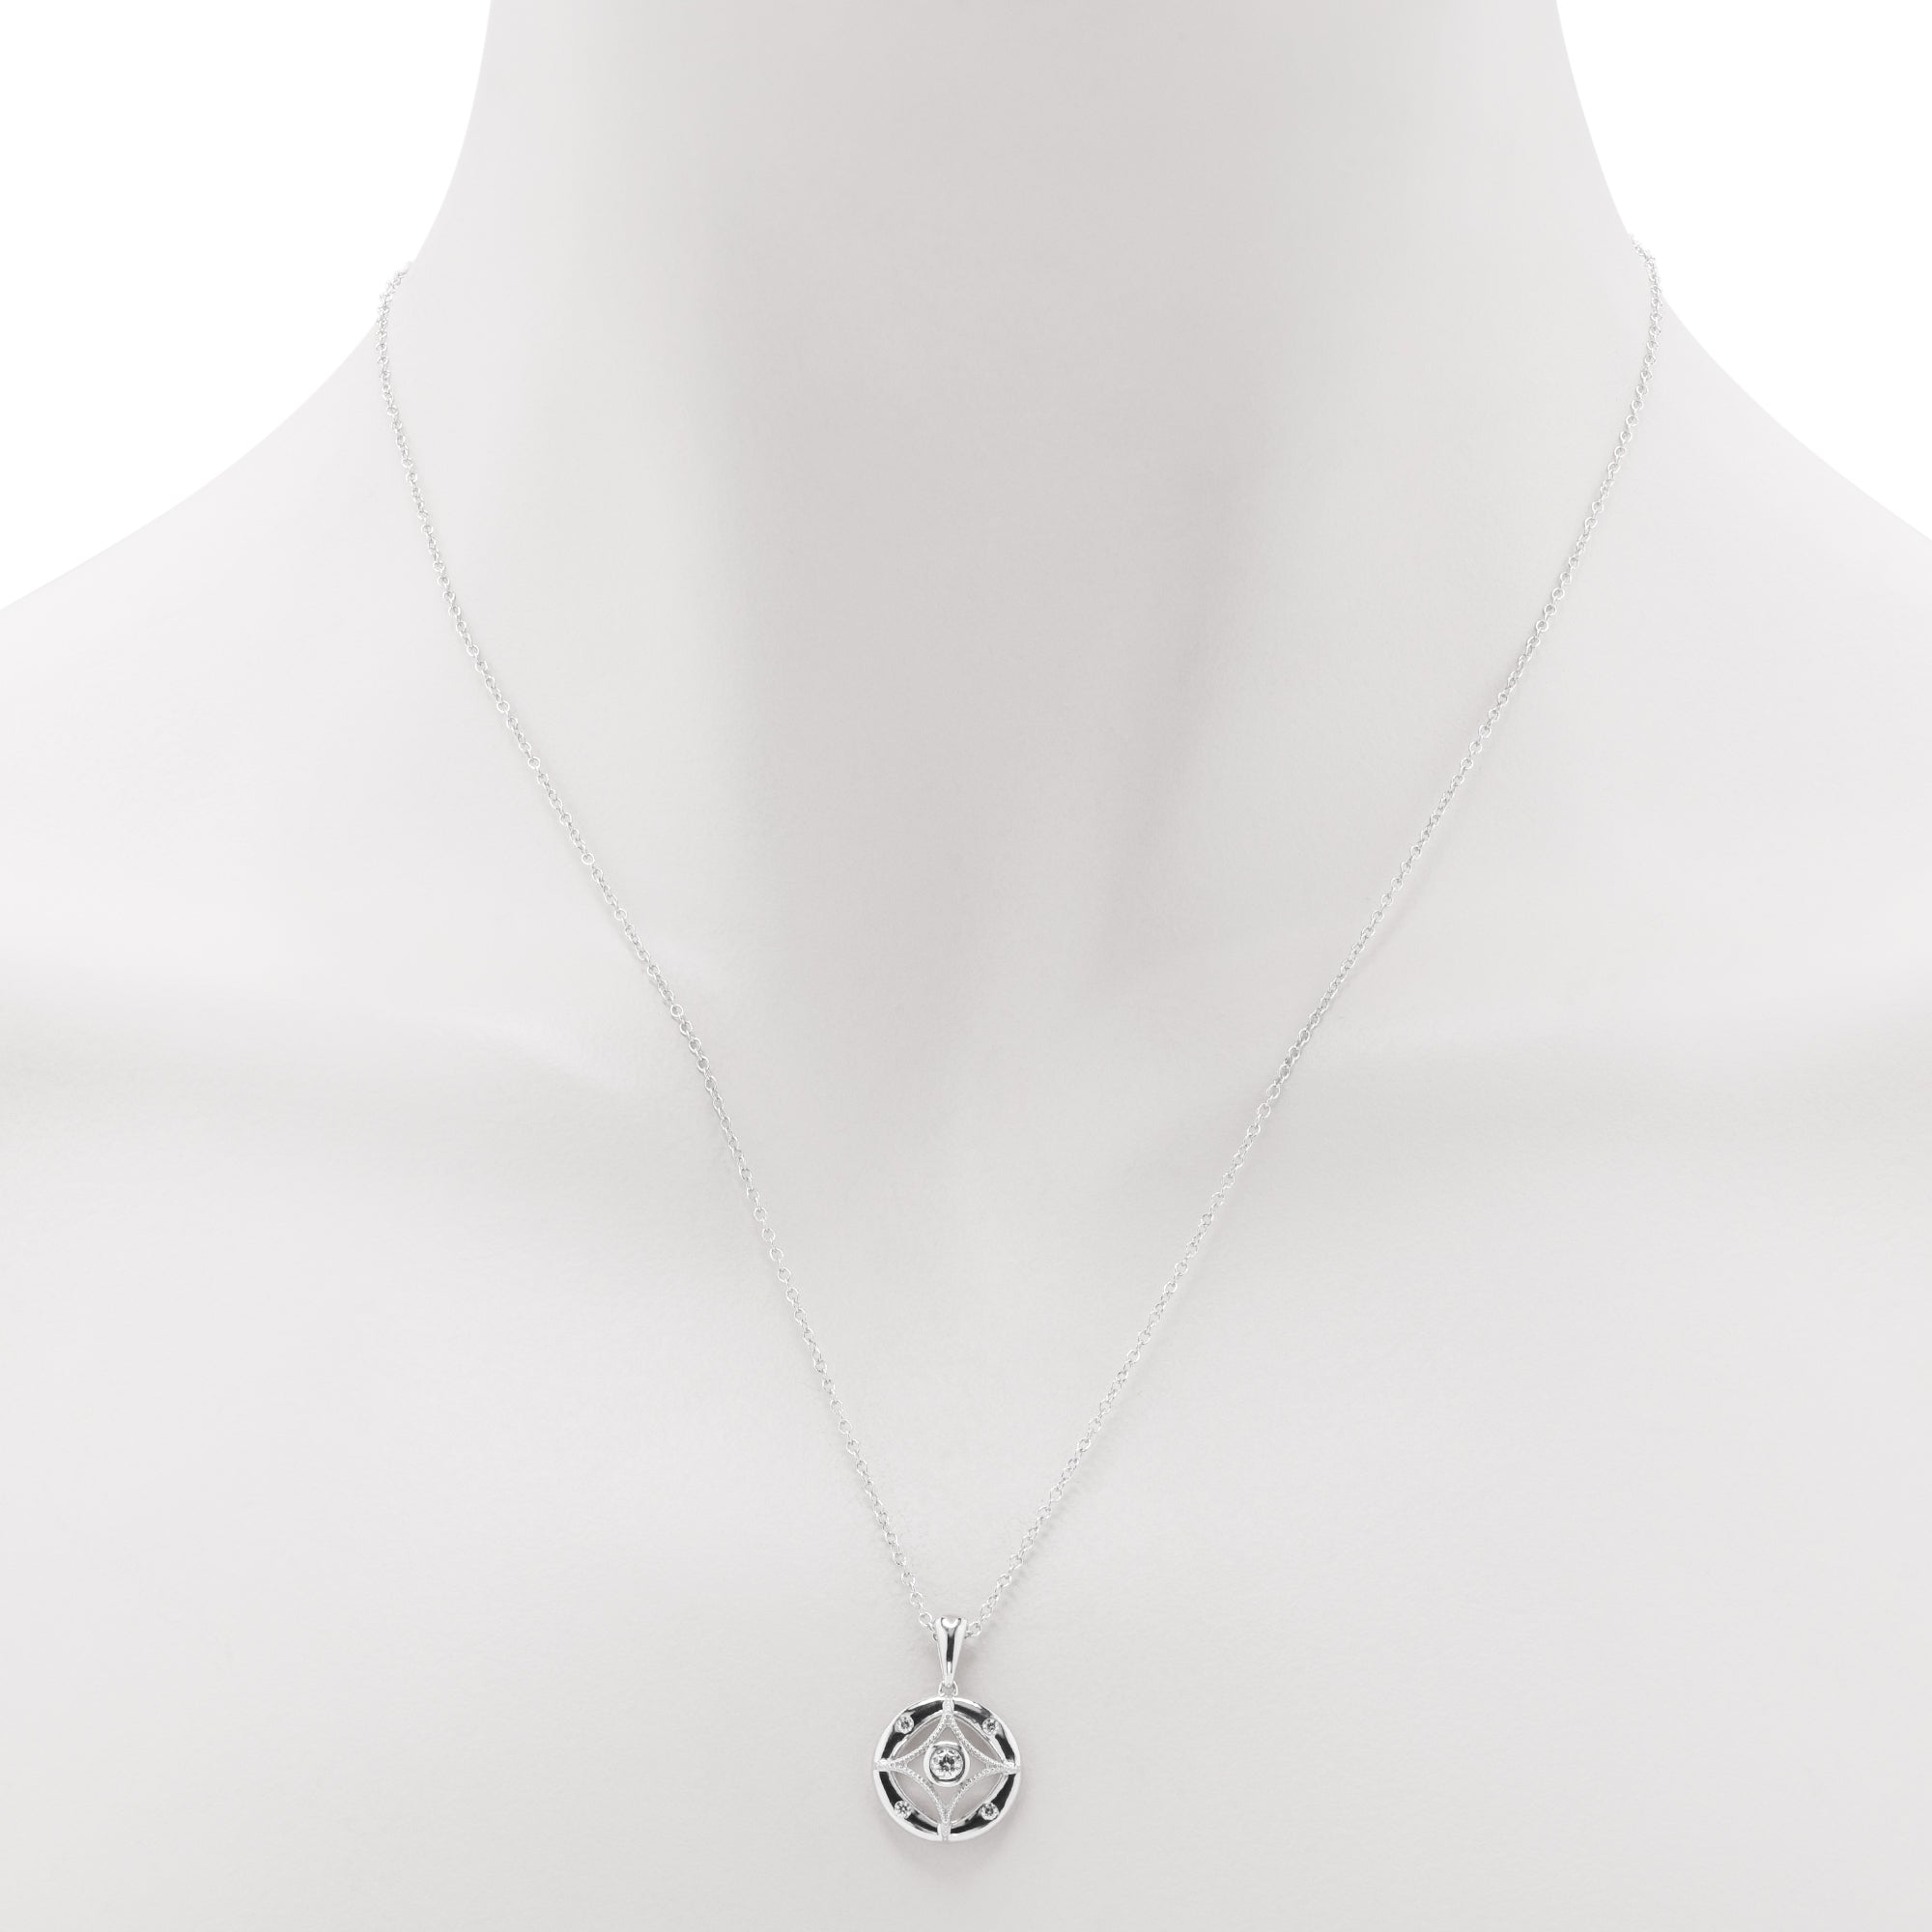 Northern Star Diamond Celestial Collection Necklace in Sterling Silver (1/10ct tw)